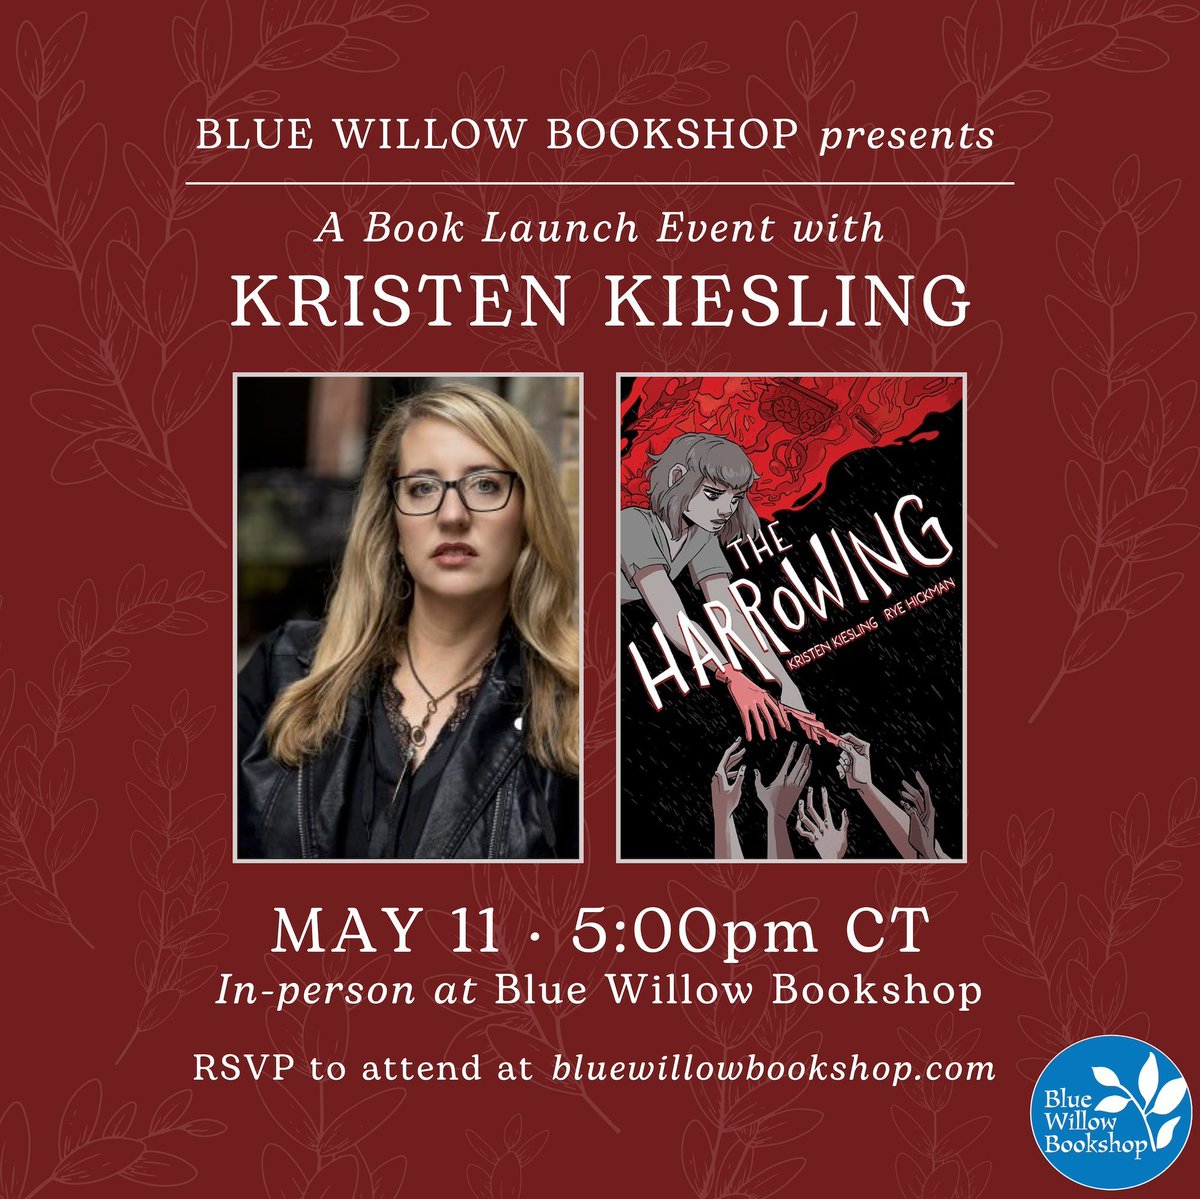 We're looking forward to welcoming award-winning author @KristenKiesling to the bookshop to celebrate her new YA graphic novel, THE HARROWING! Join us to hear more about this original, genre-blending story and meet the author. ✨ Details: bluewillowbookshop.com/event/kiesling… @ABRAMSbooks